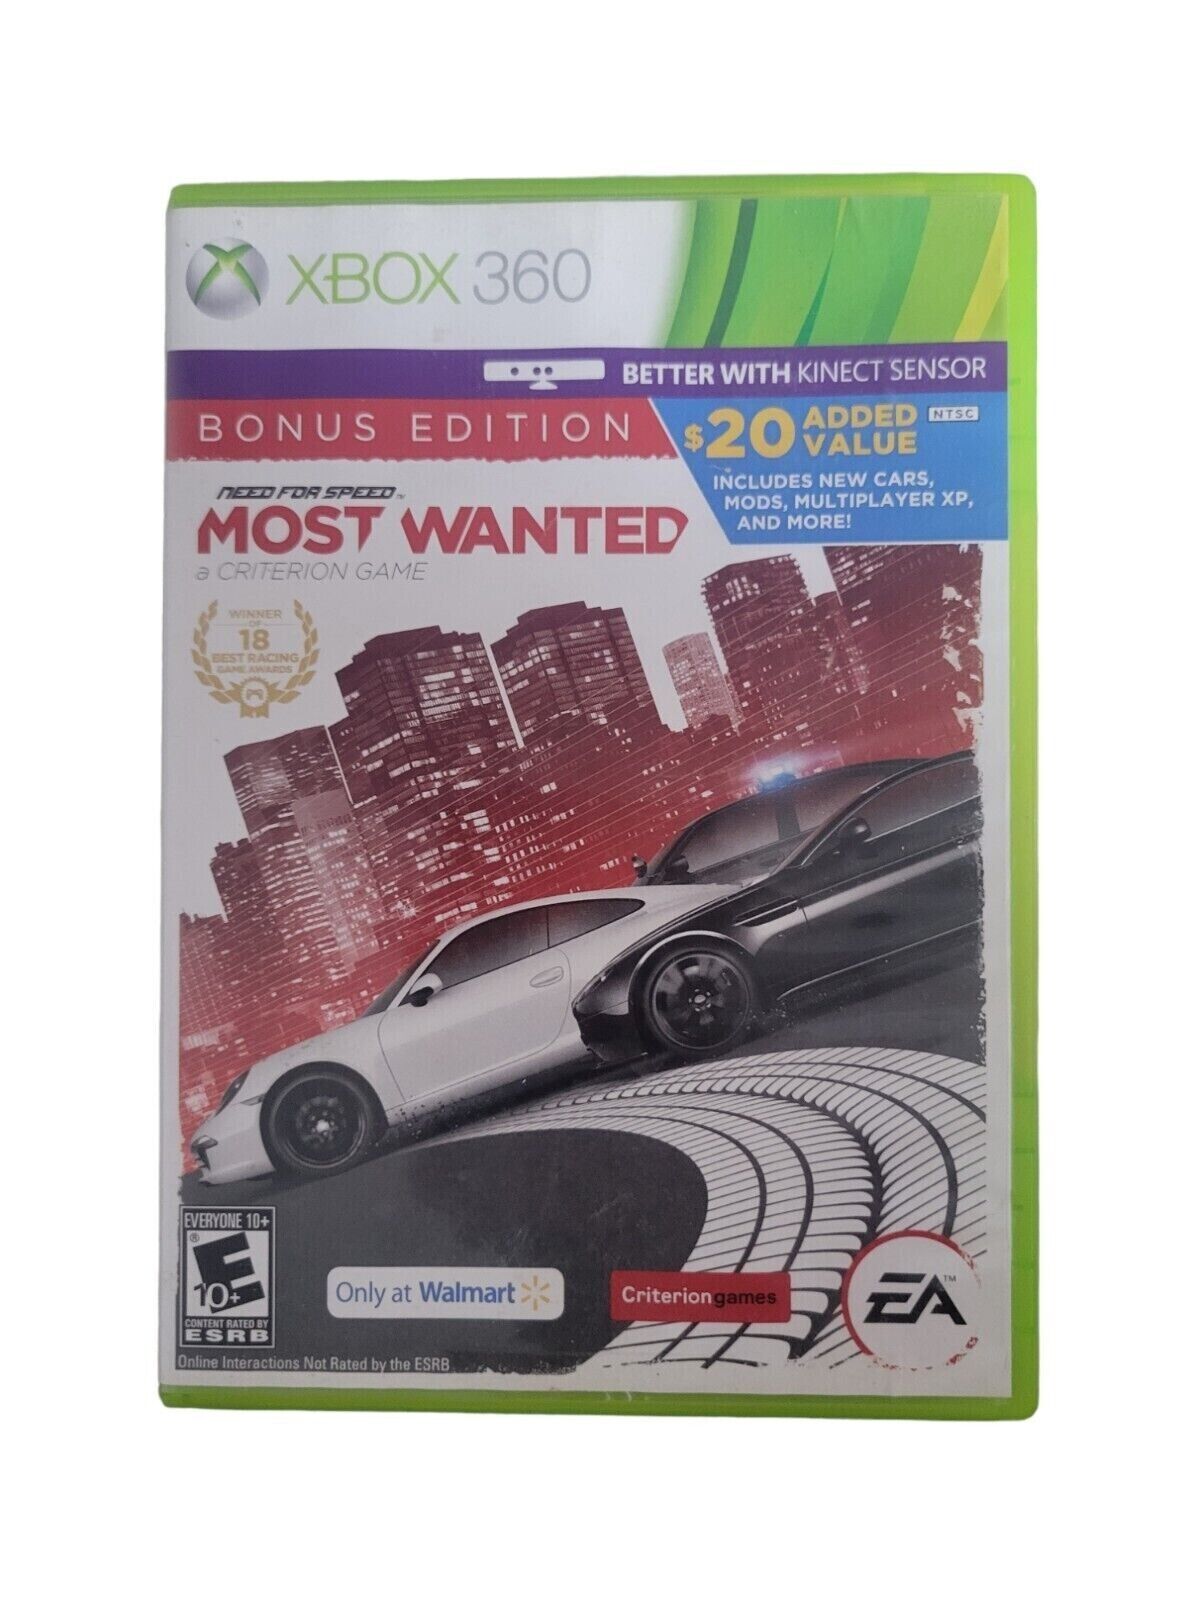 Need for Speed -Bonus Edition- Most Wanted: A Criterion Game, Microsoft Xbox 360